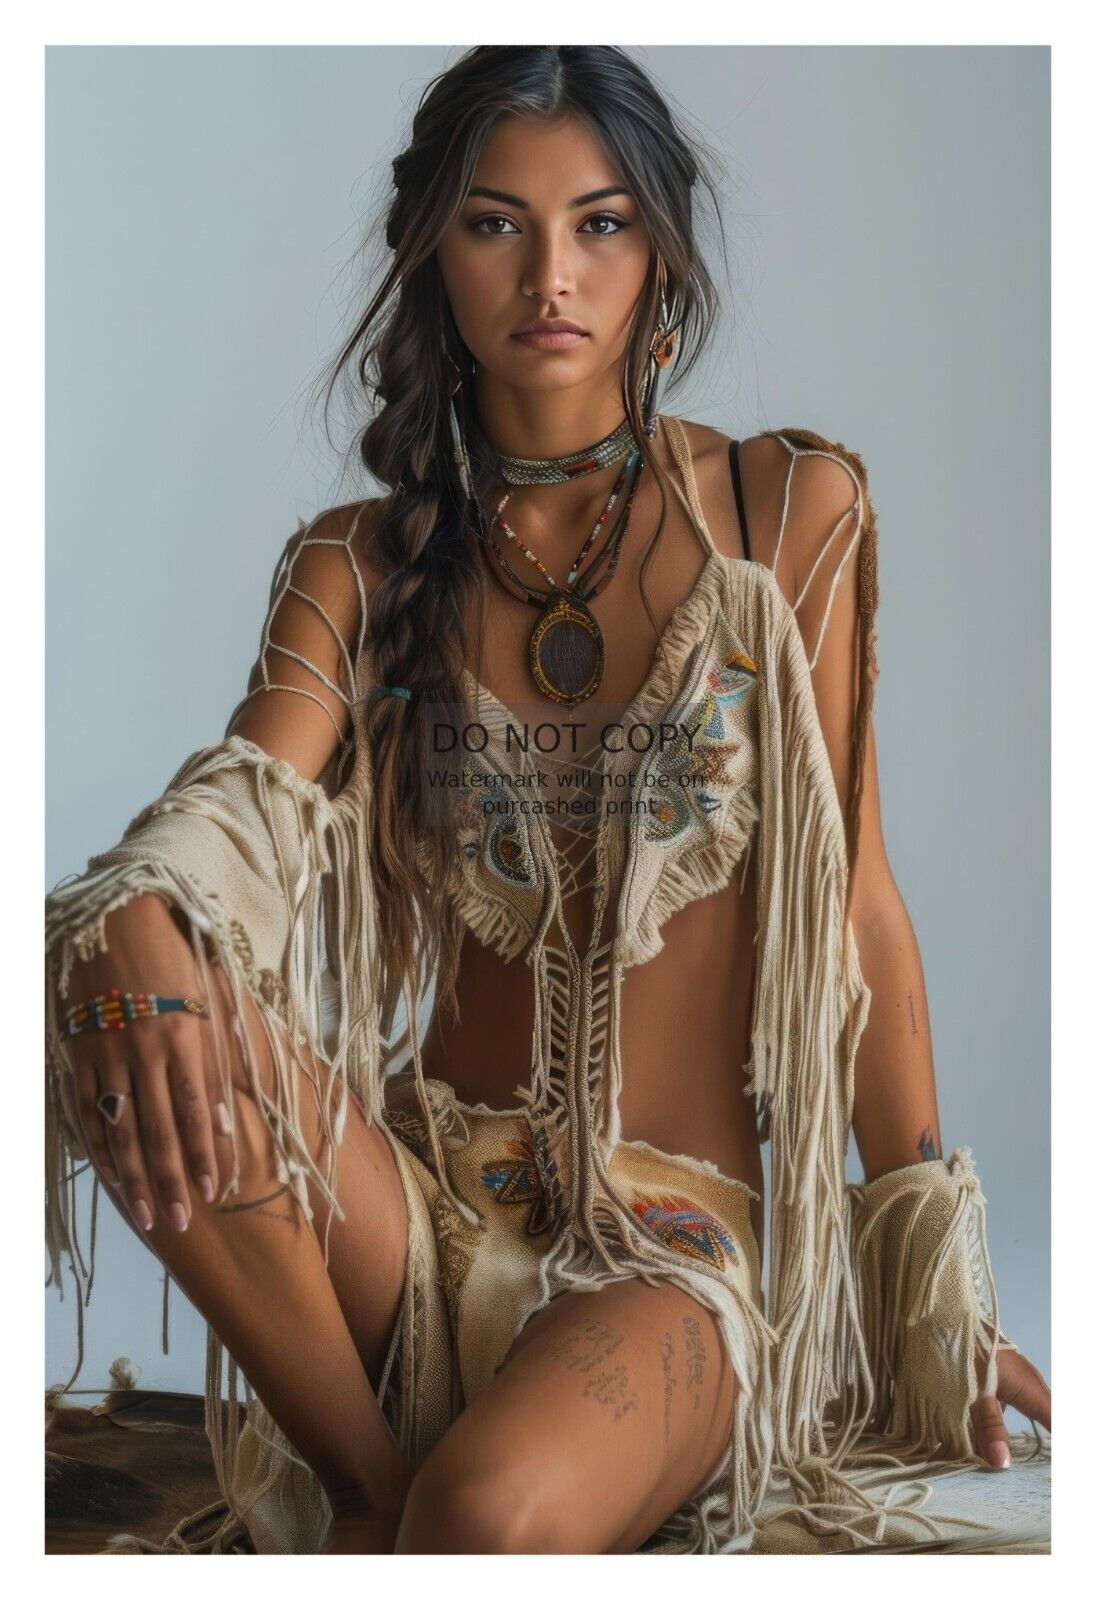 GORGEOUS YOUNG SEXY NATIVE AMERICAN LADY 4X6 FANTASY PHOTO